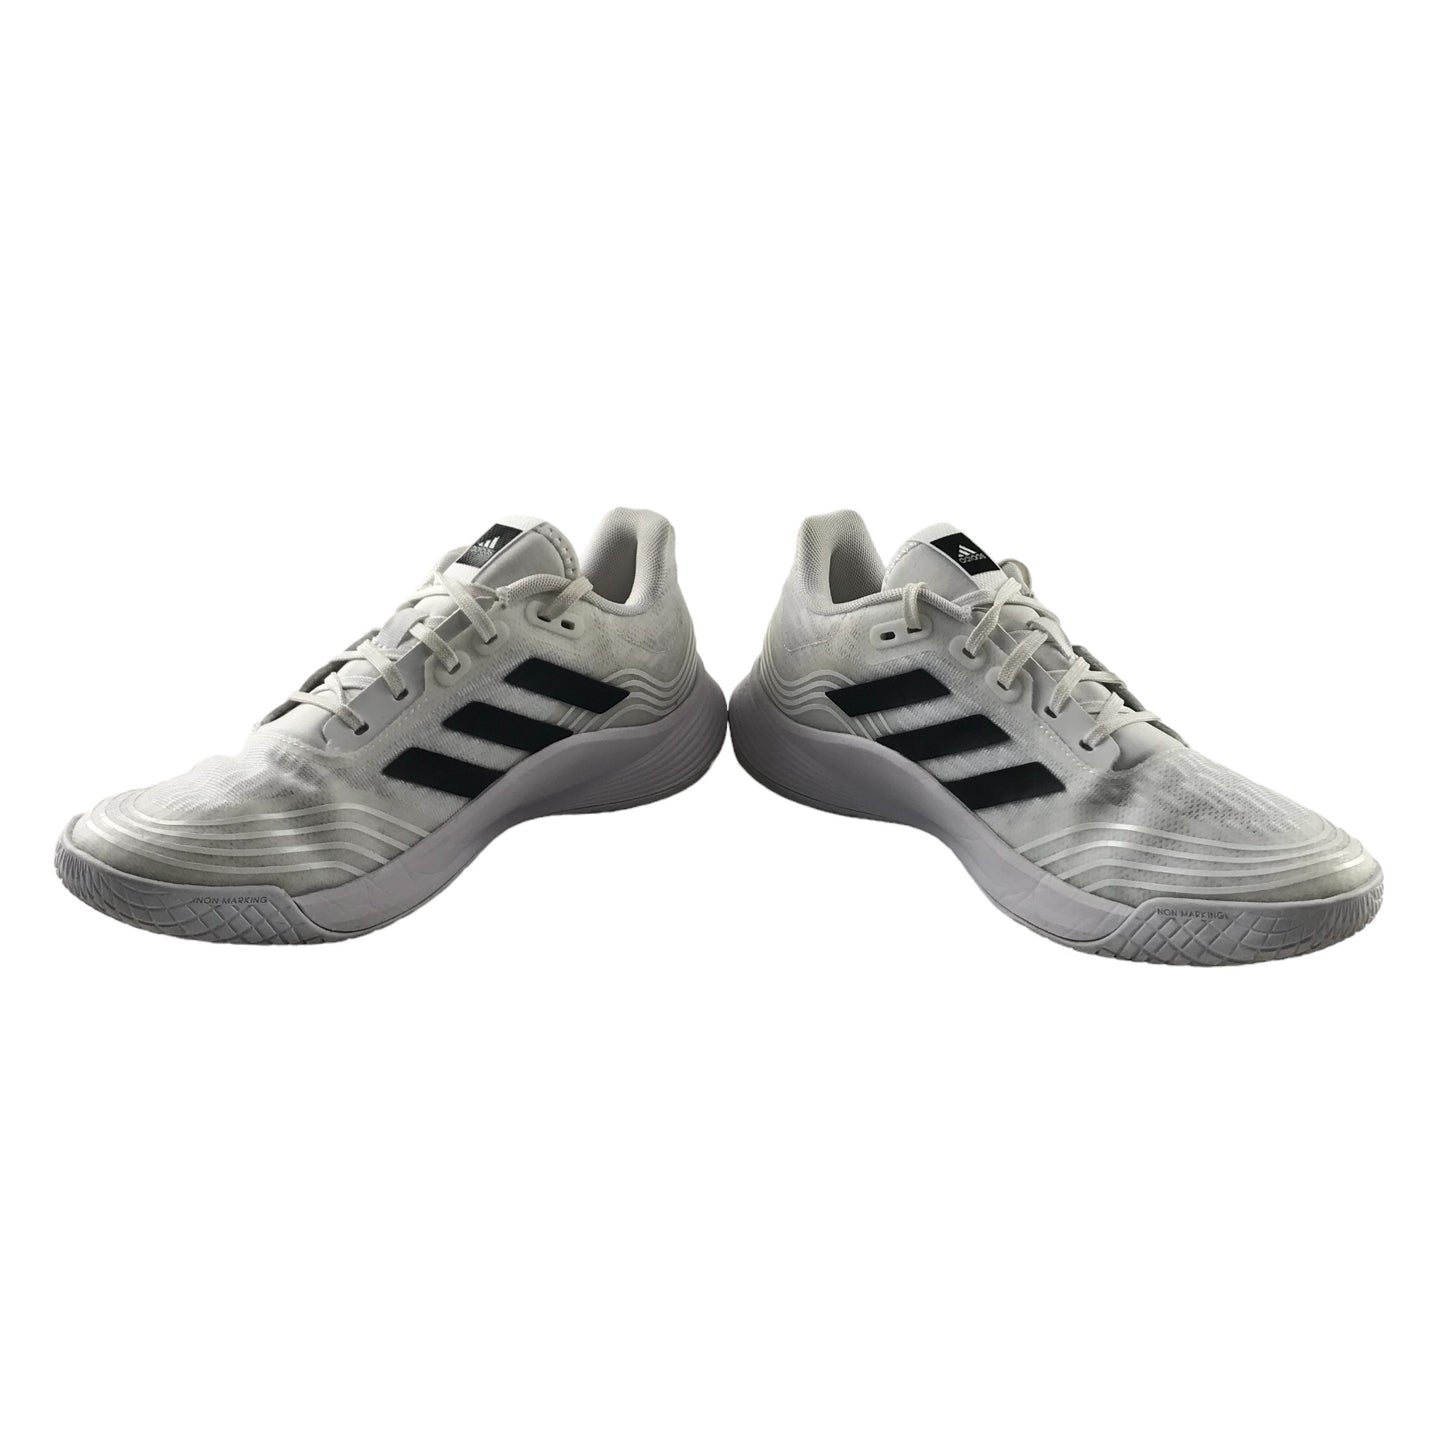 Adidas Bounce Trainers Shoe Size 5 White and Black with Laces